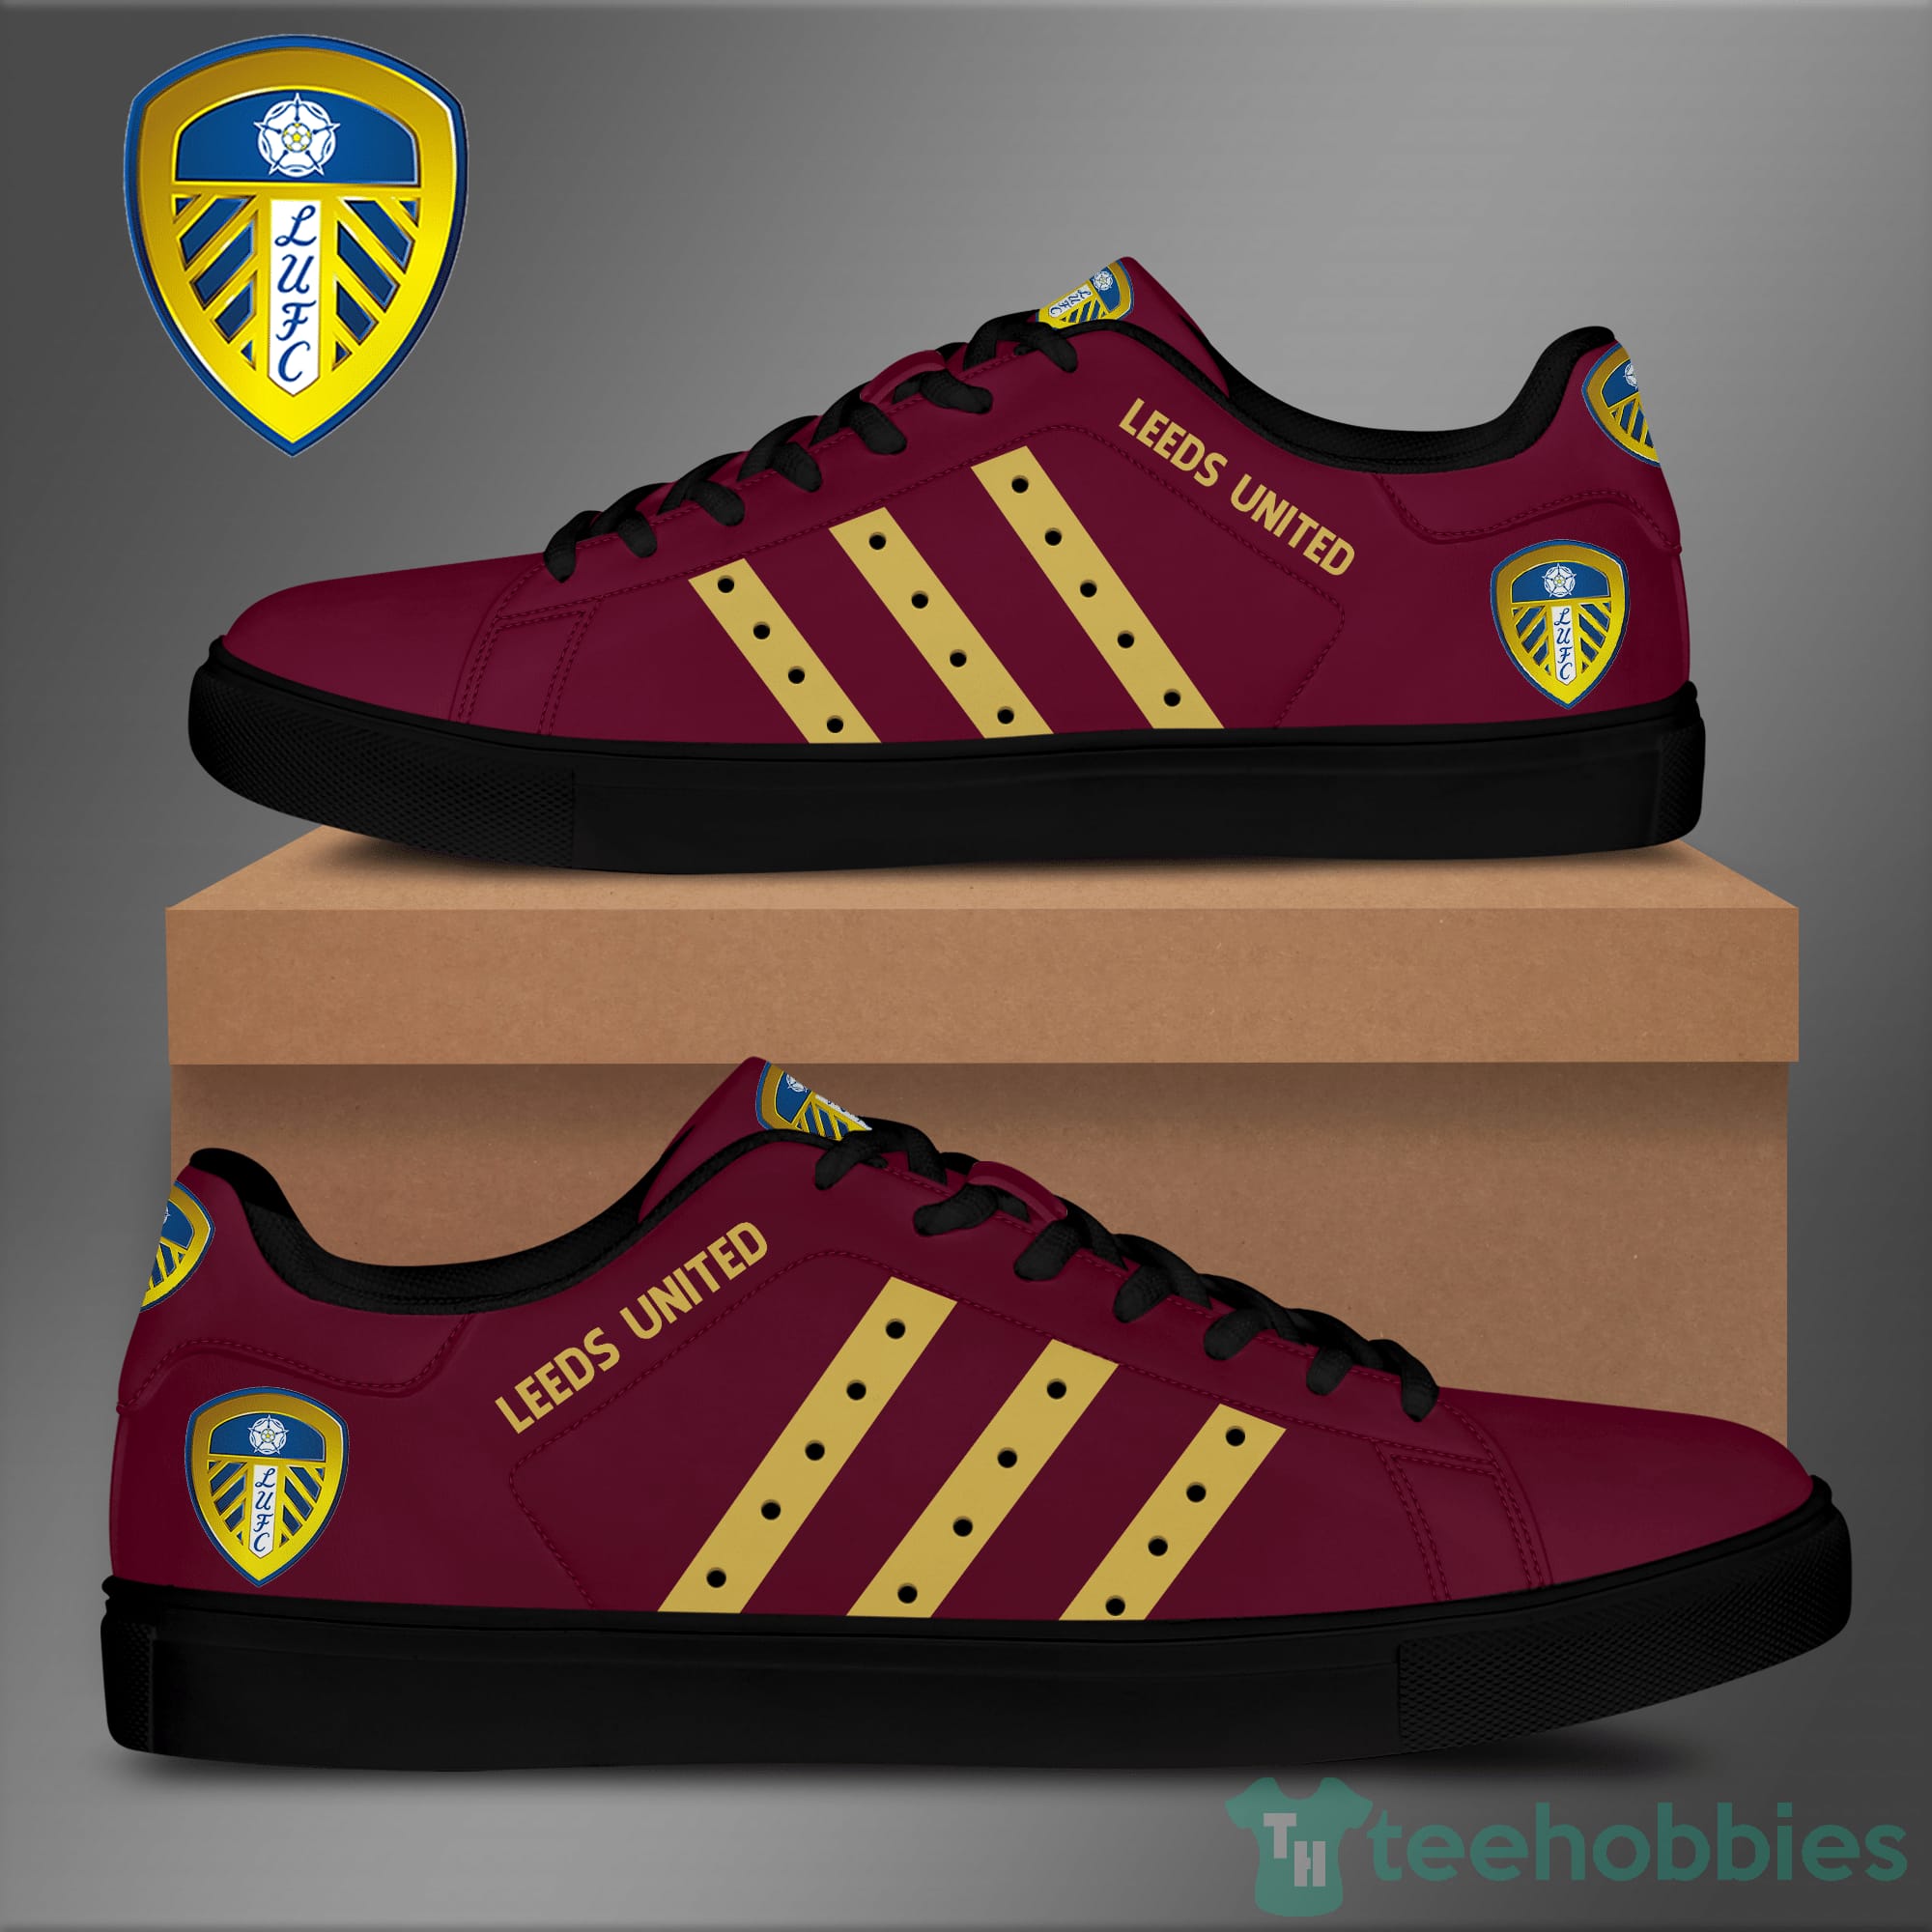 Leeds United F.C Cardinal Red Low Top Skate Shoes Product photo 2